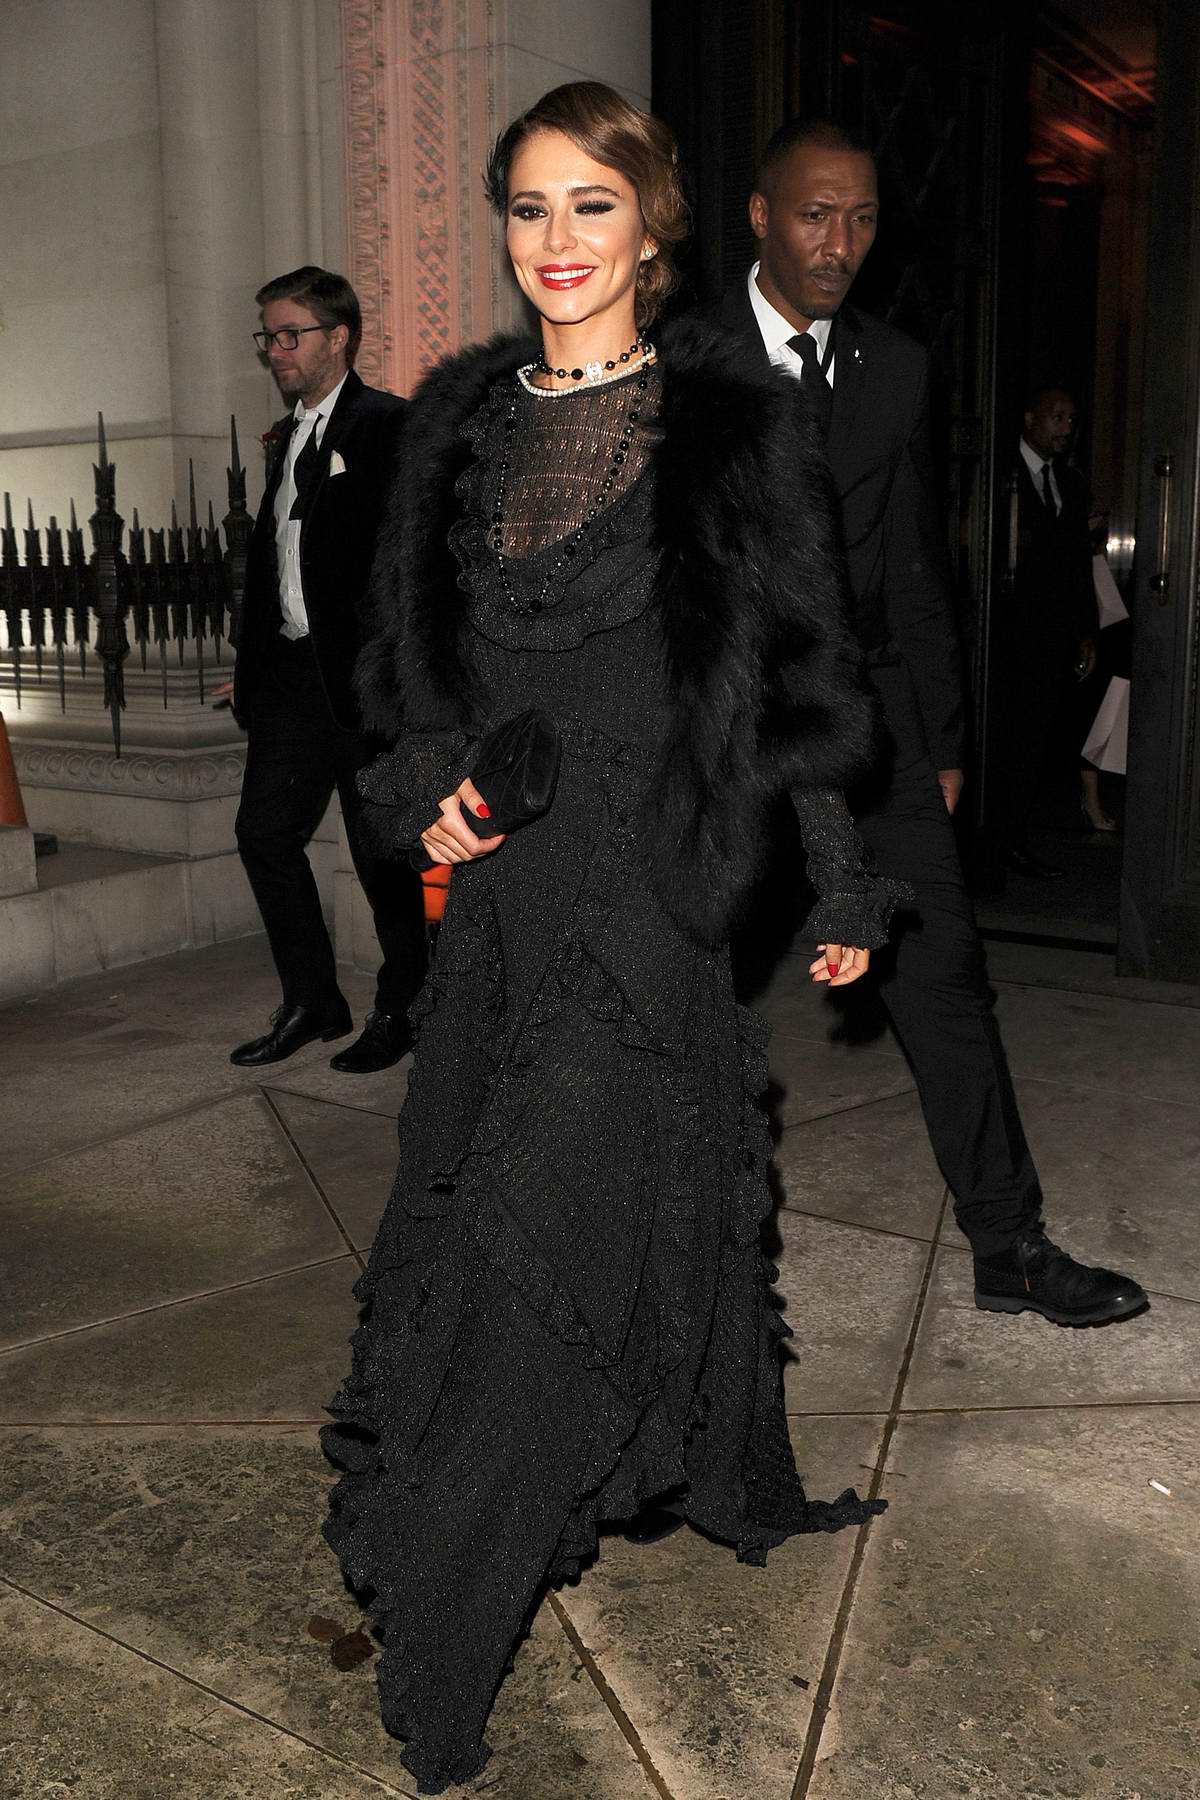 Cheryl Tweedy looks great in a vintage black lace dress while leaving the Freemasons Hall in Covent Garden, London, UK